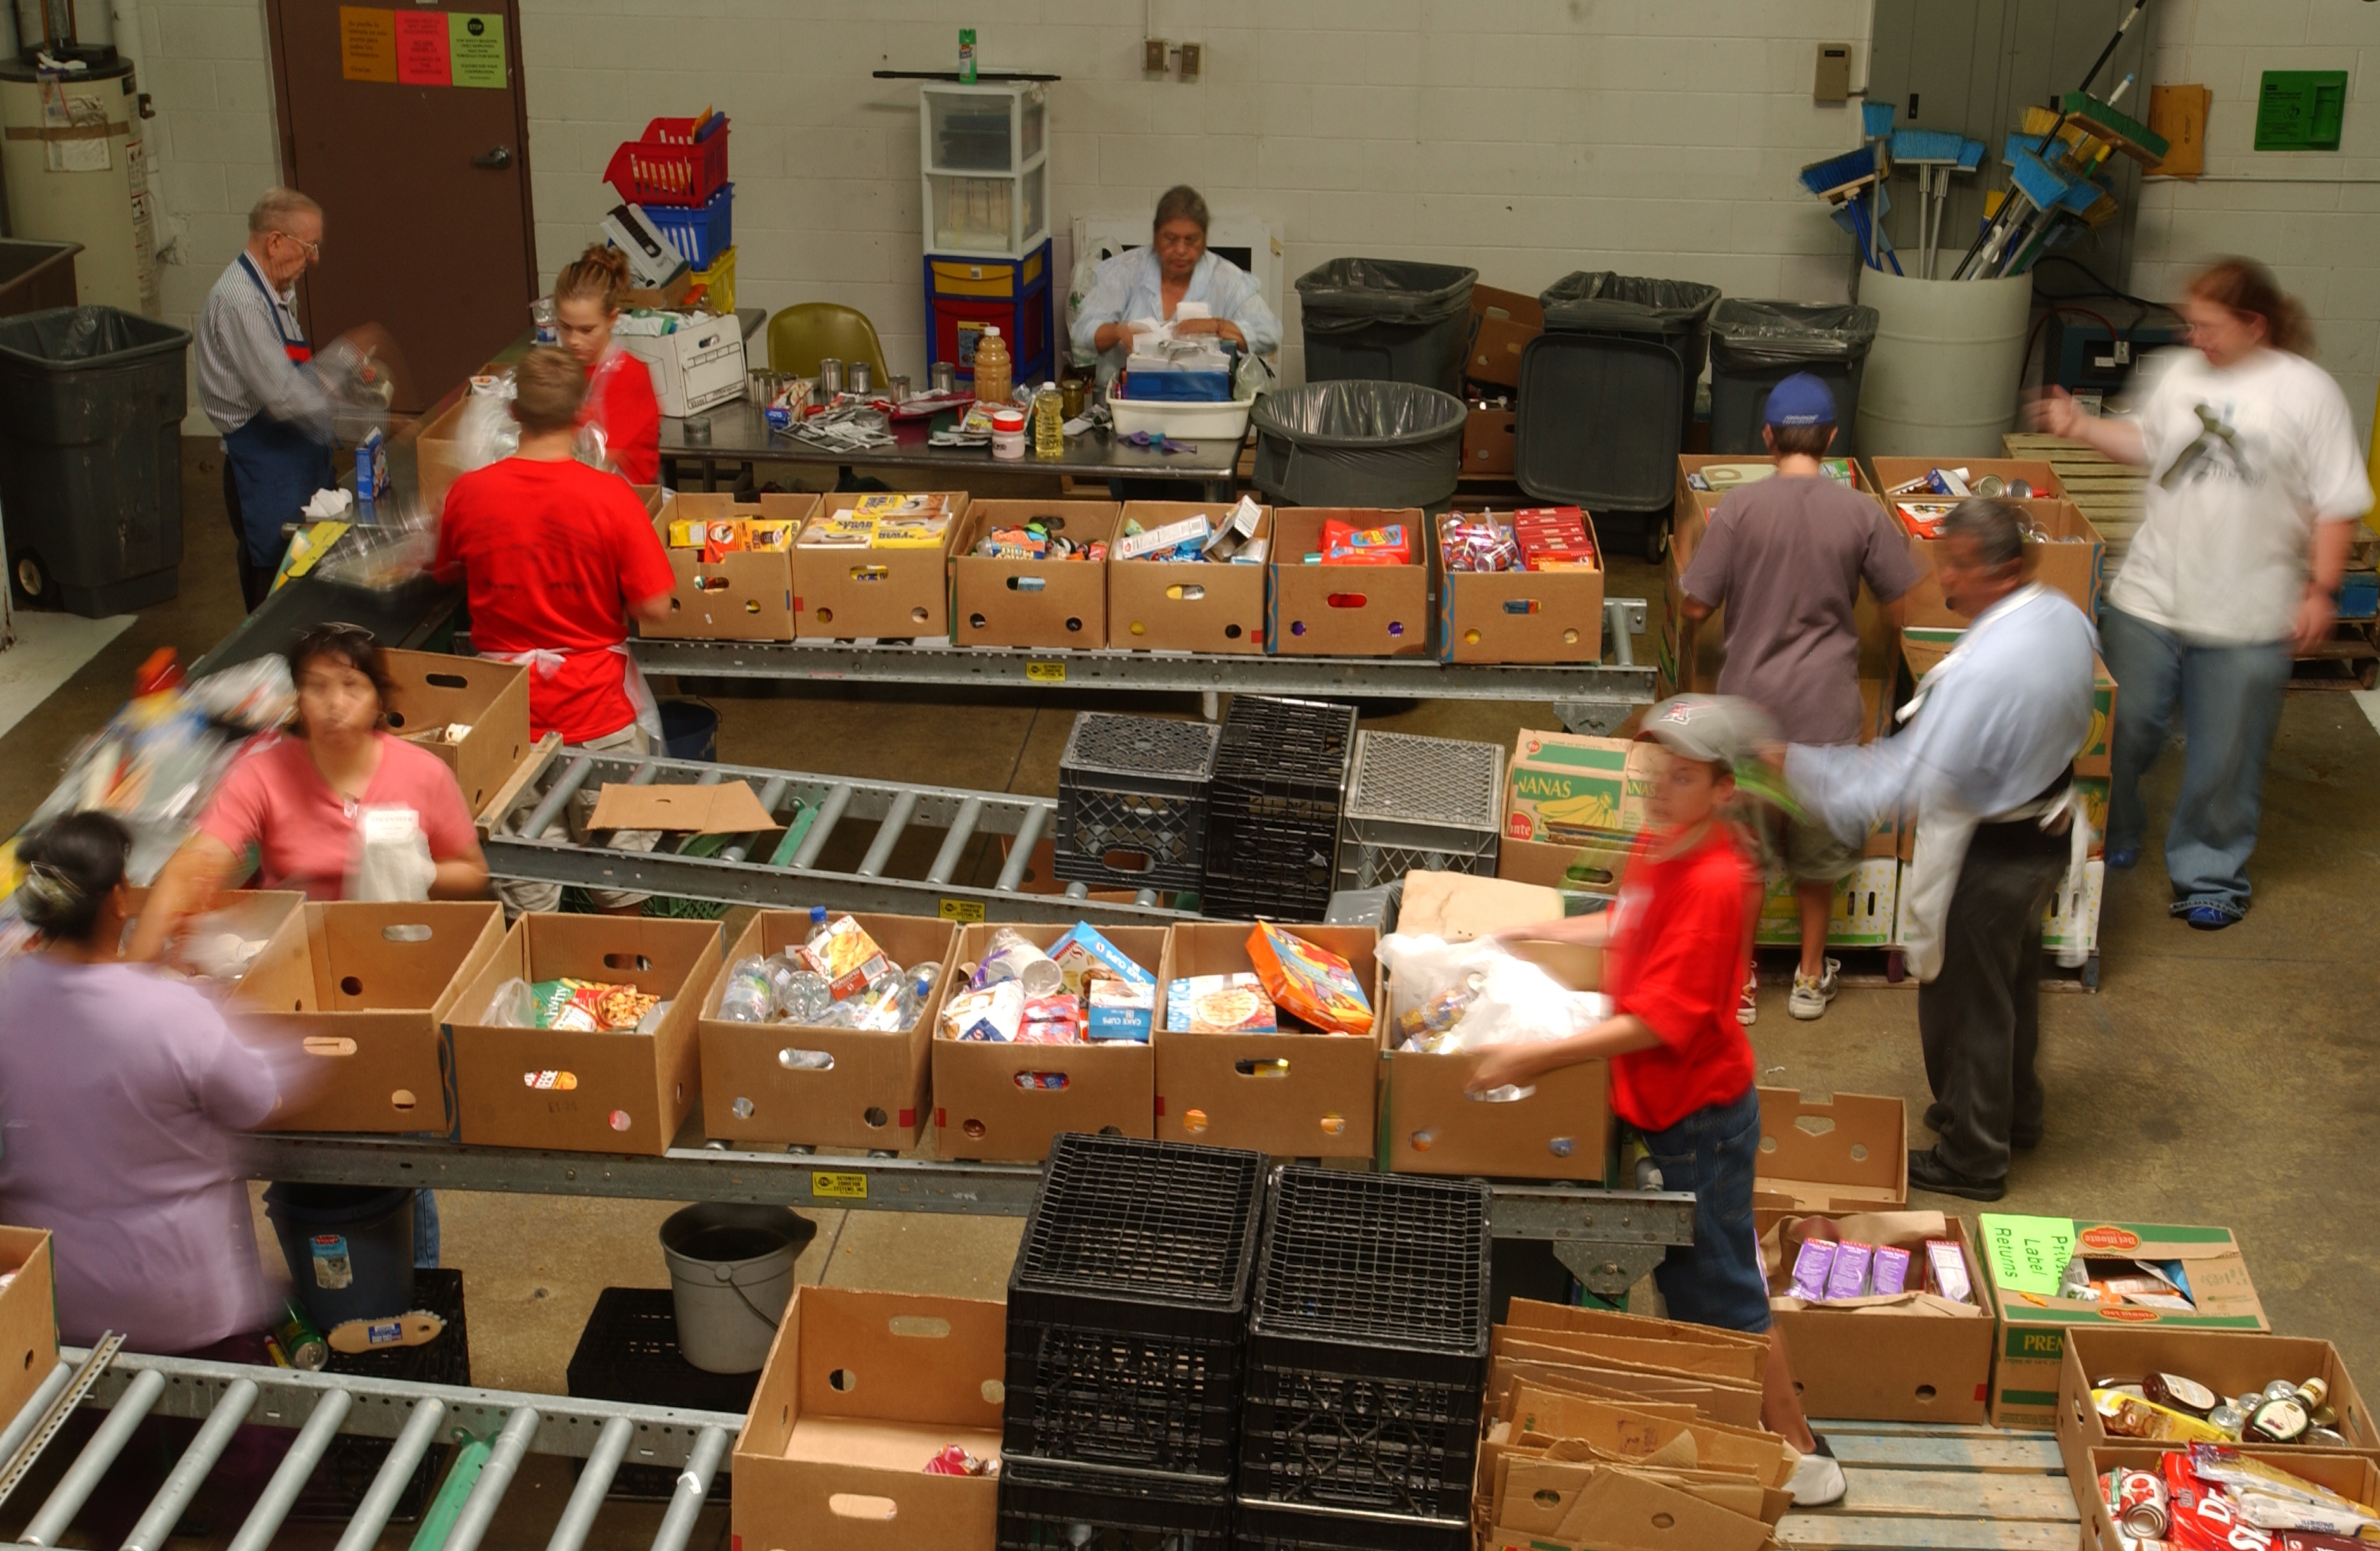 8 Lessons Learned Volunteering At Food Bank Donate Food